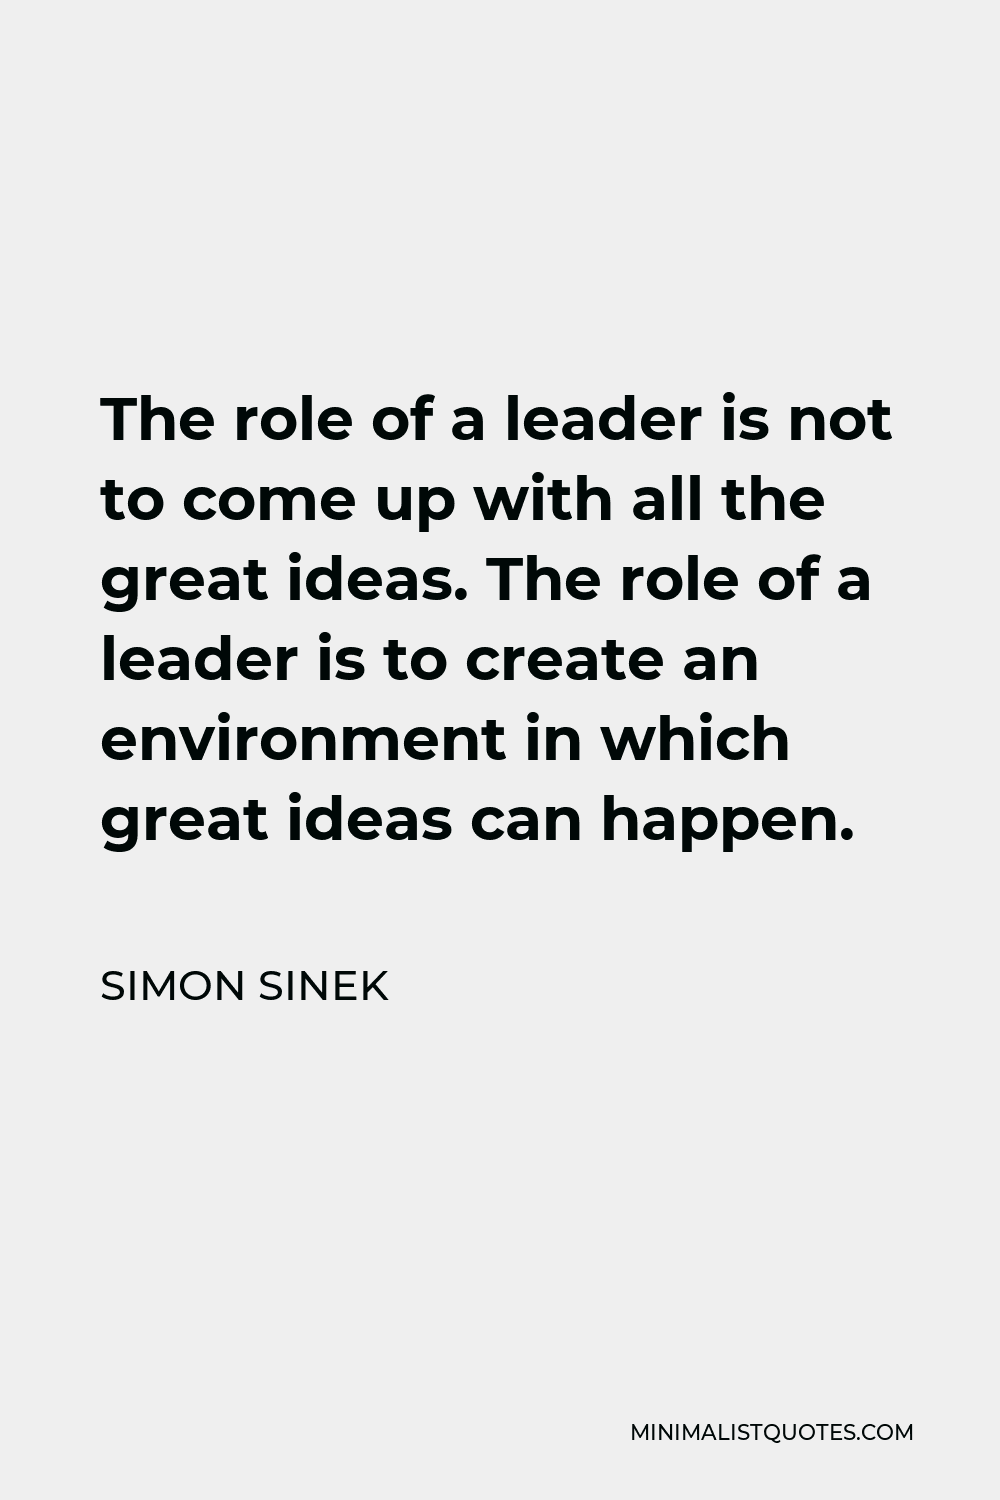 Simon Sinek Quote - The role of a leader is not to come up with all the great ideas. The role of a leader is to create an environment in which great ideas can happen.